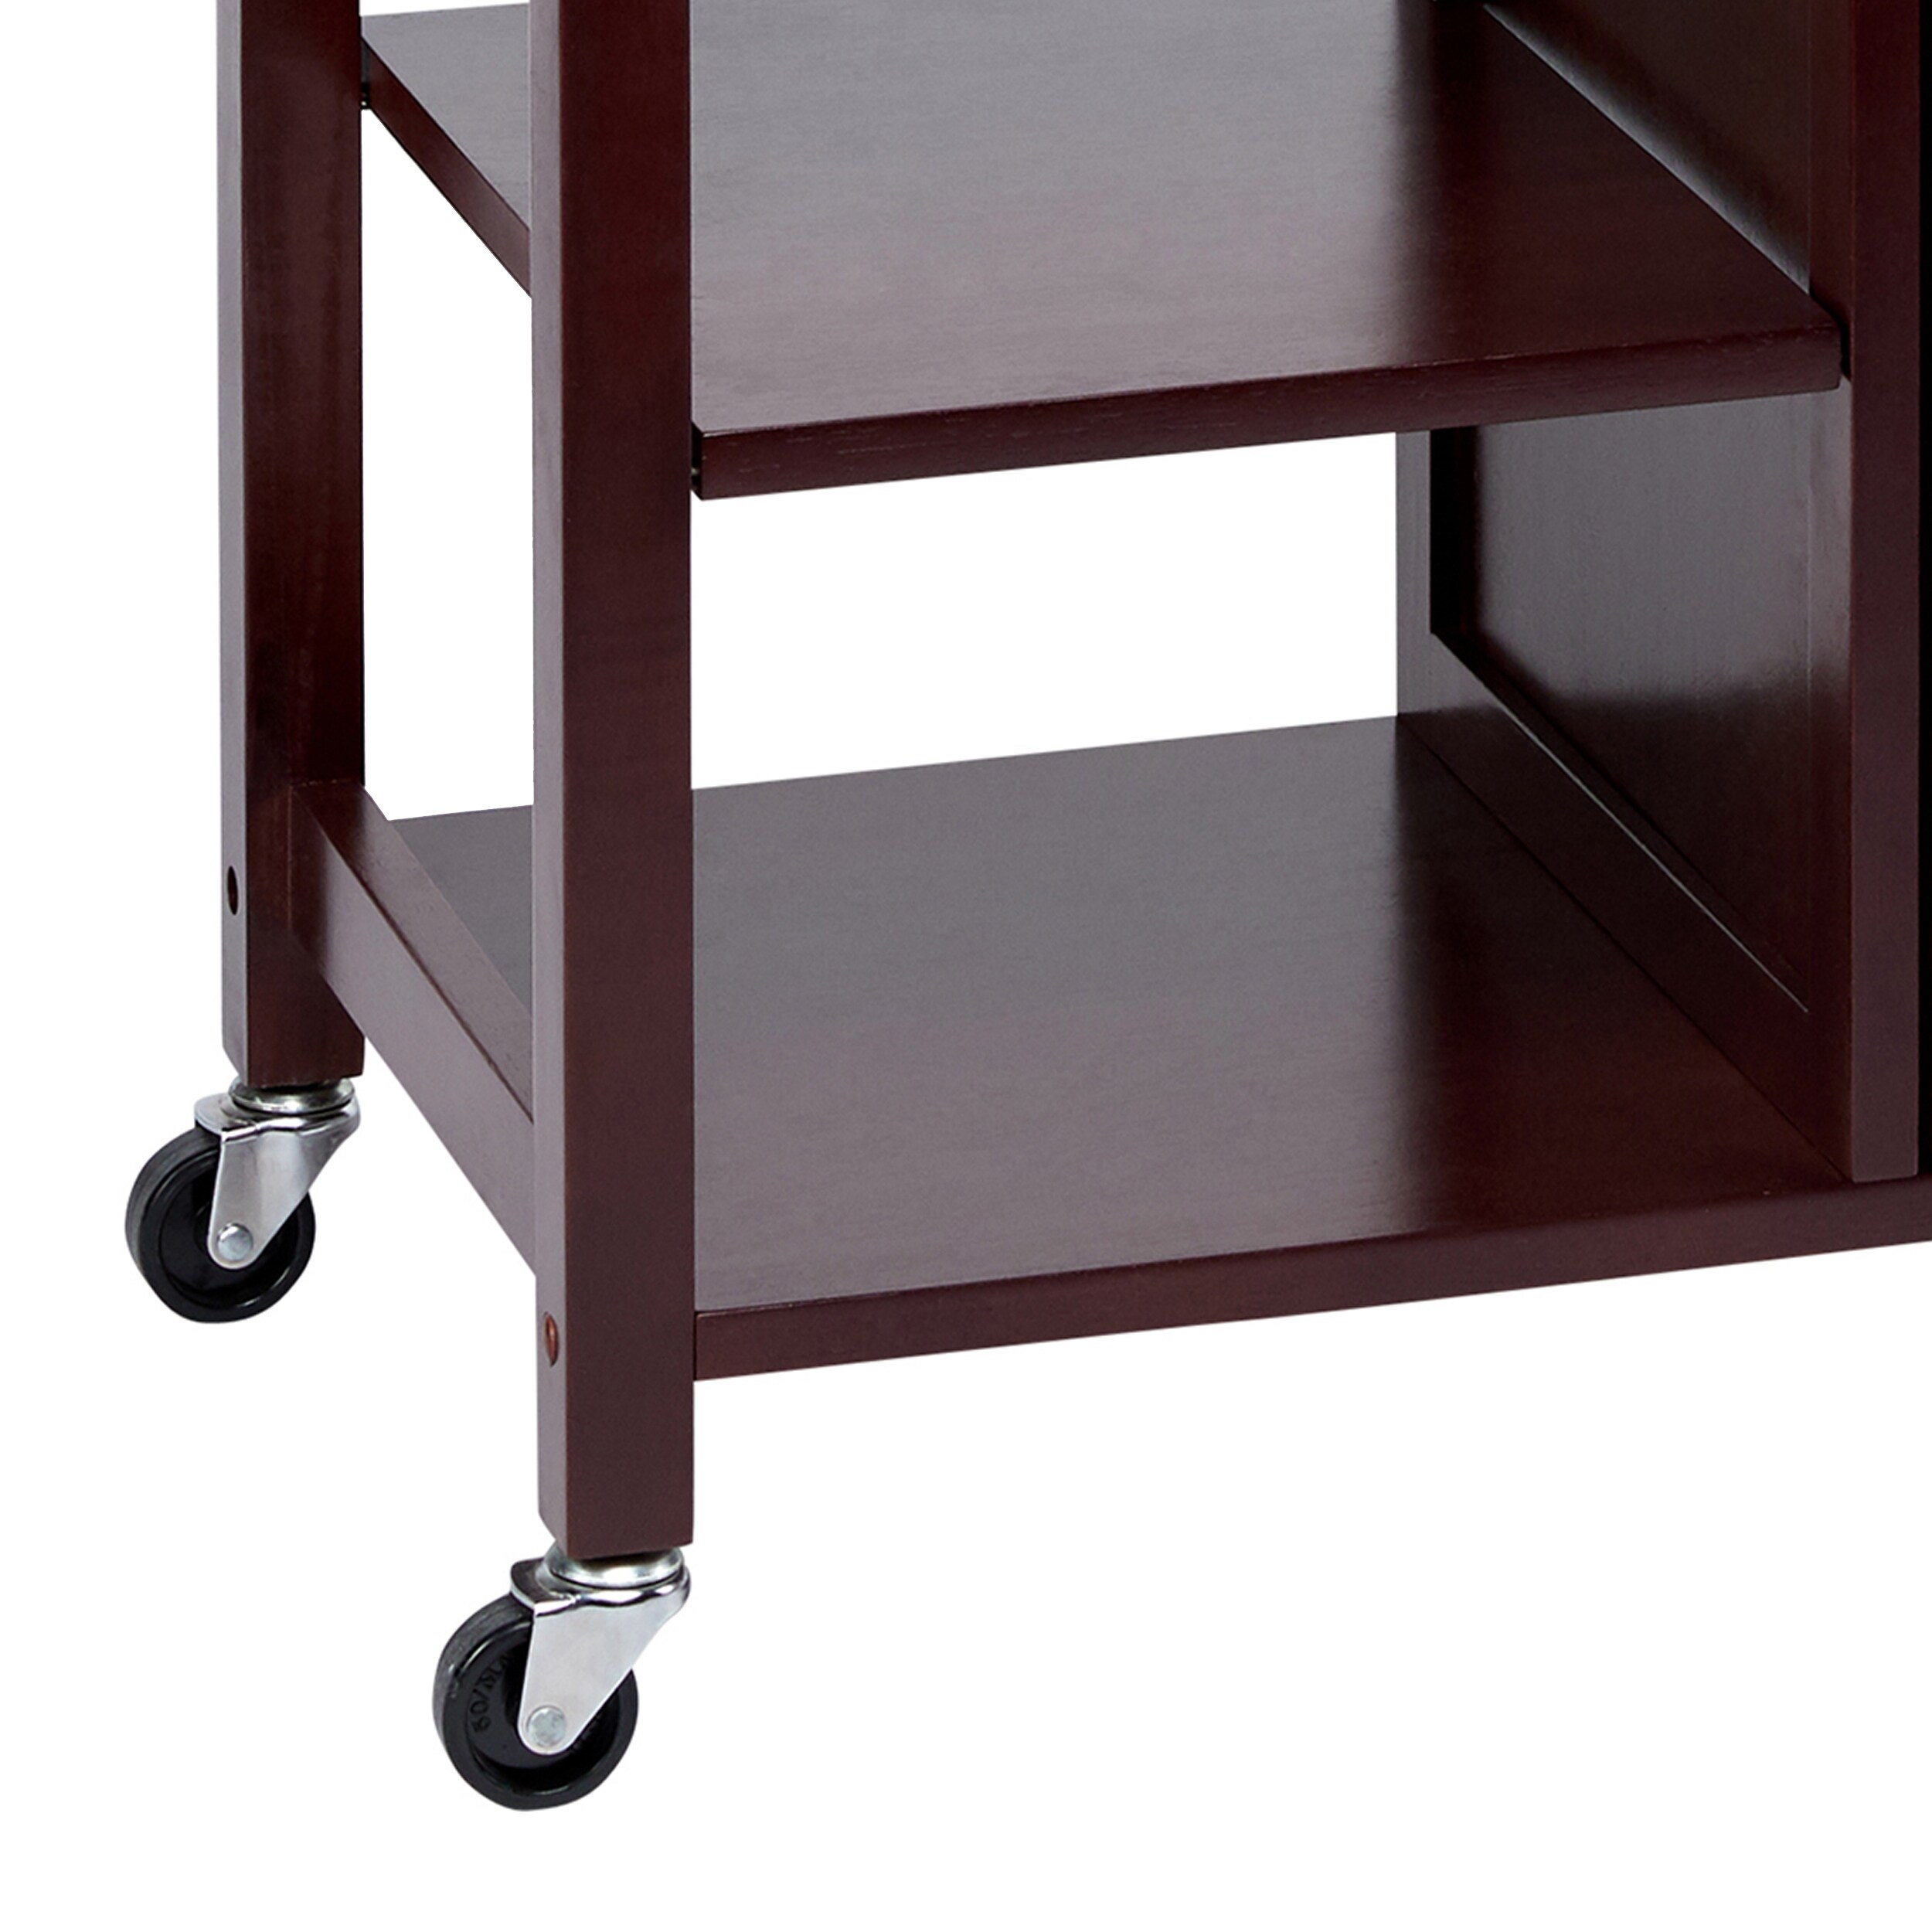 High Quality Rubberwood Kitchen Island Cart with Cabinet